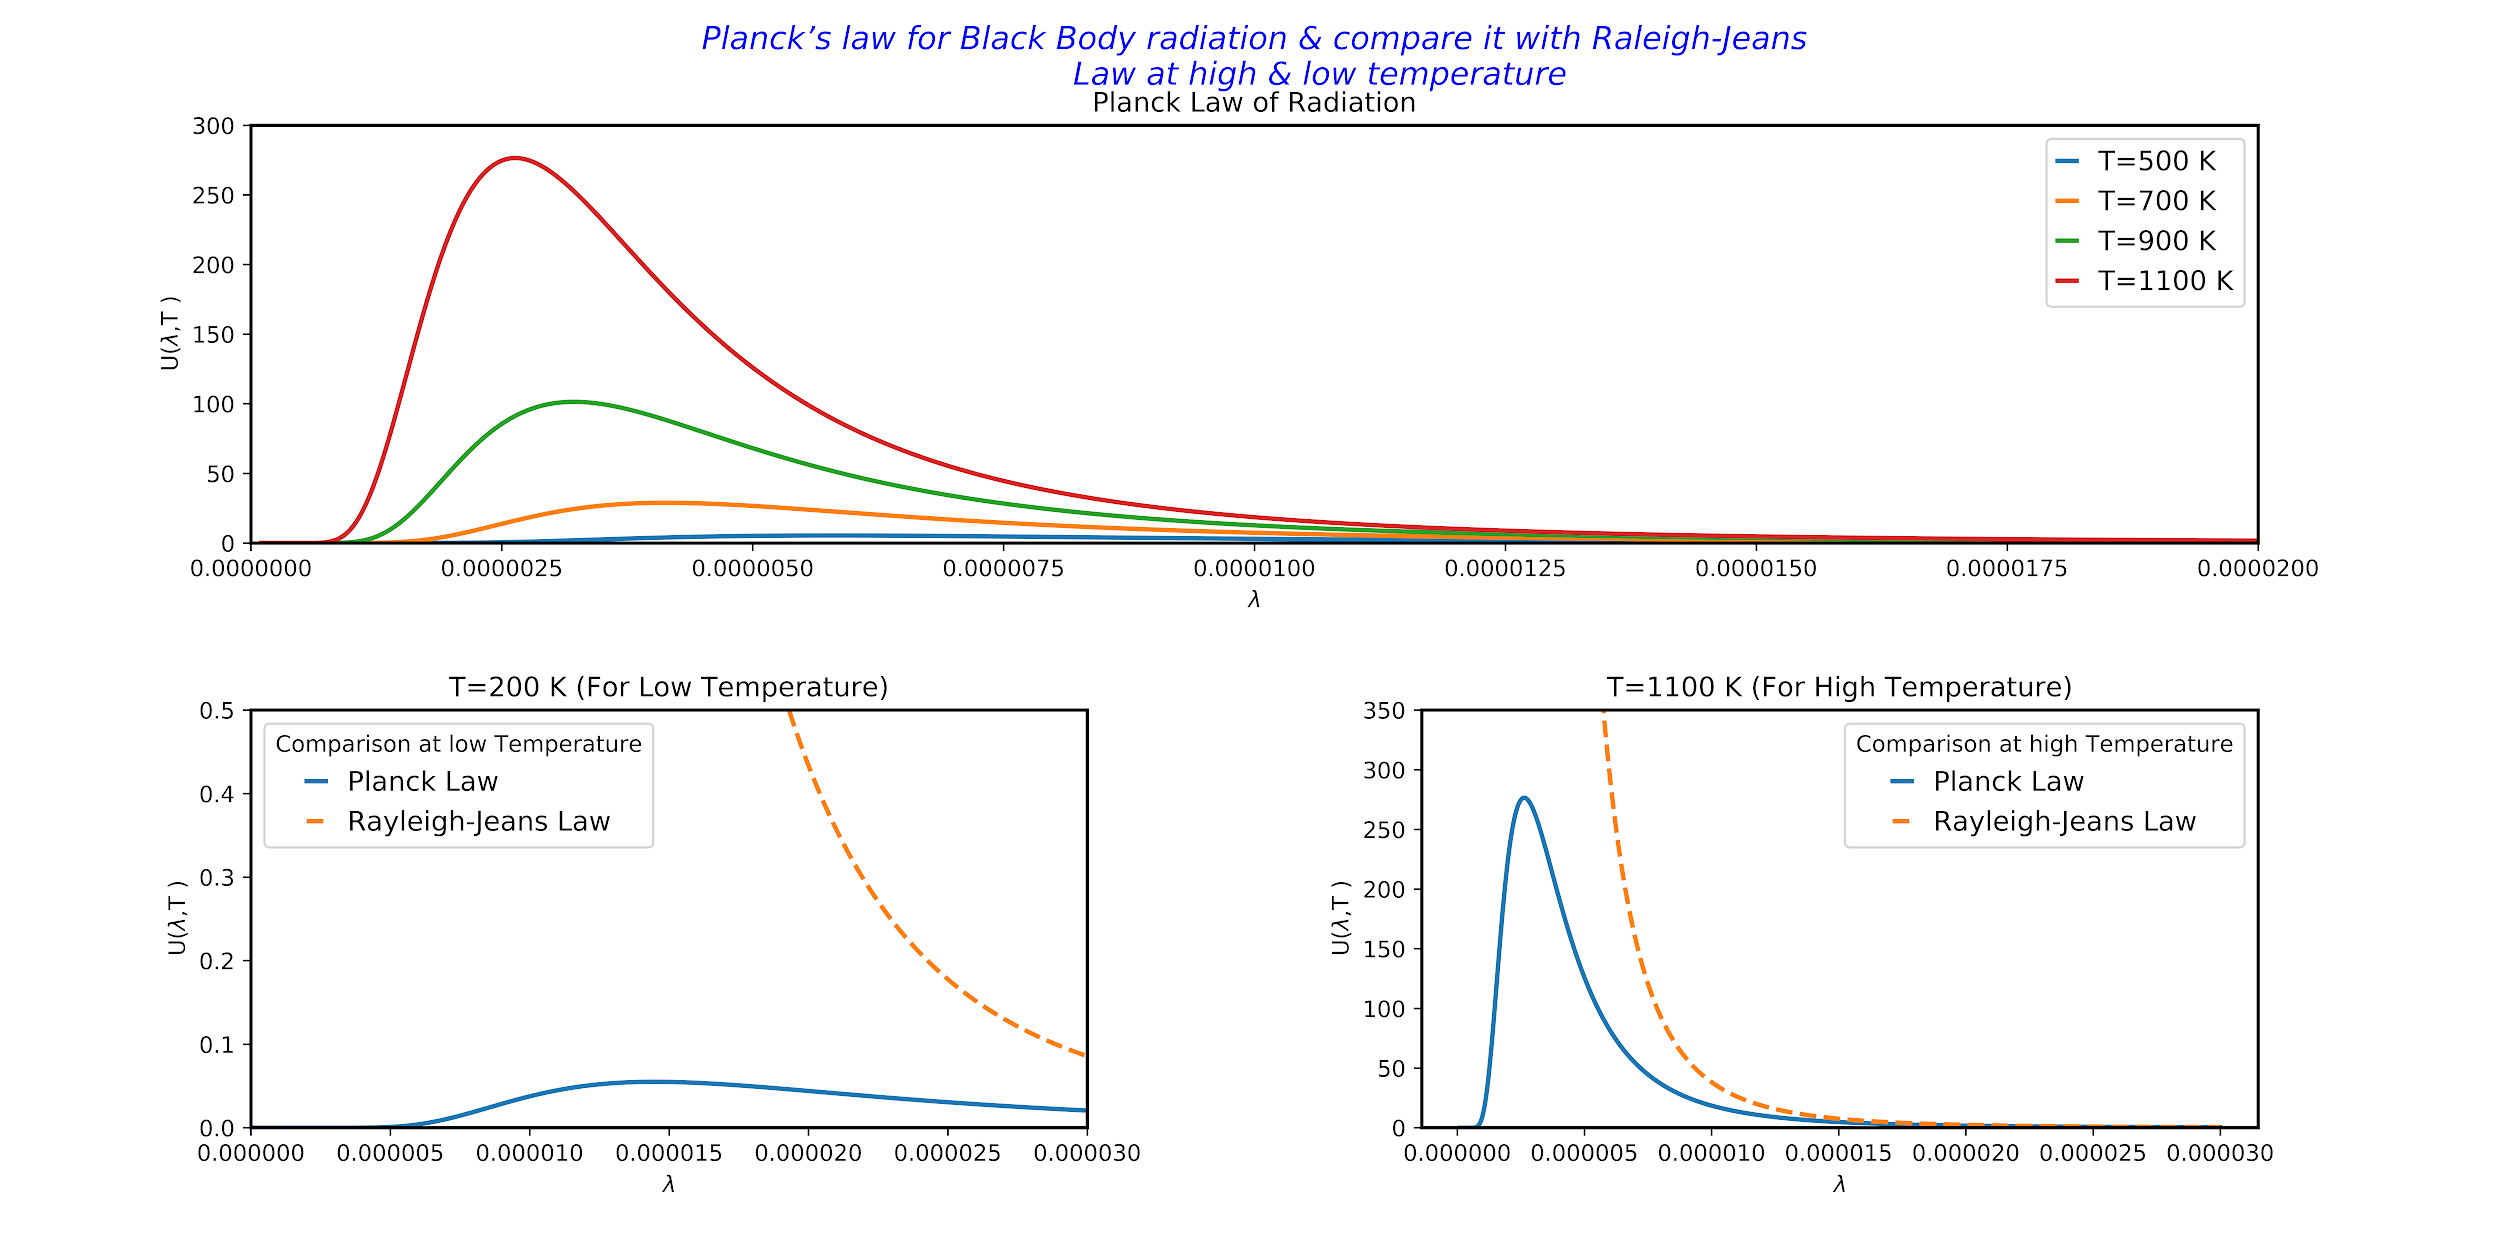 Planck's law and Rayleigh-Jeans law plot comparison and high and low temperature through python